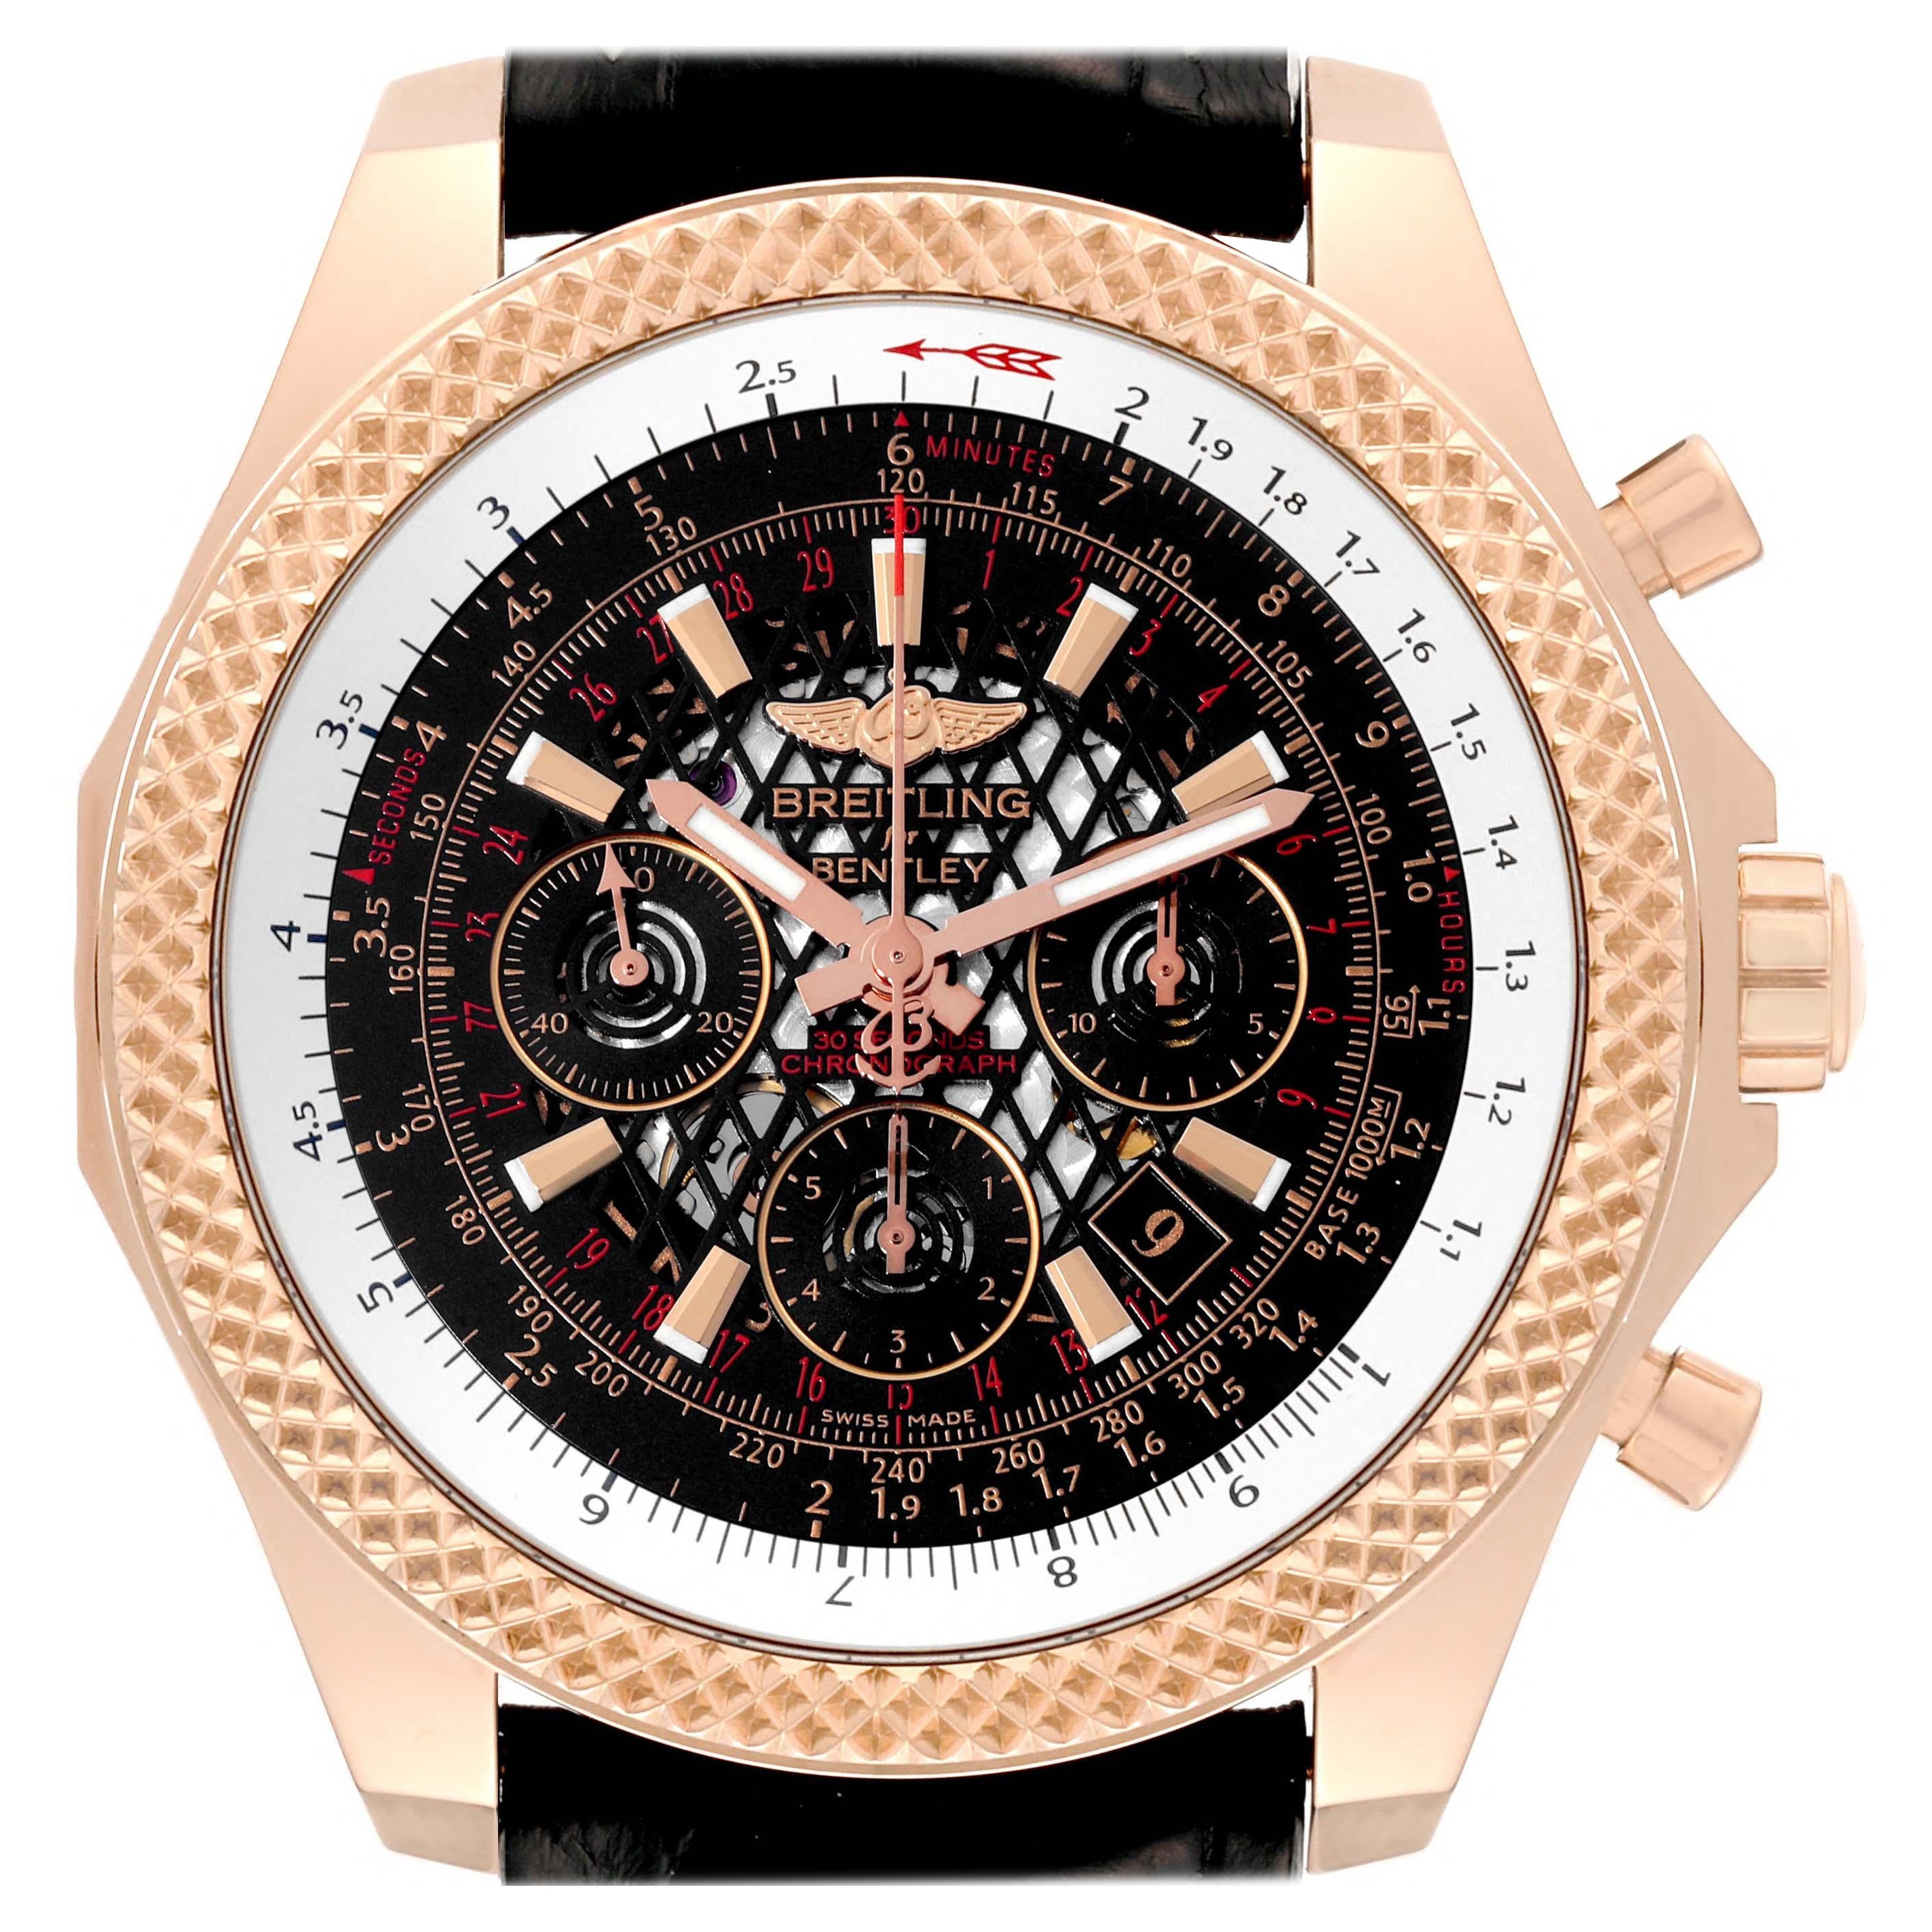 Breitling Bentley B06 Black Dial Rose Gold Mens Watch RB0611 Box Card For Sale